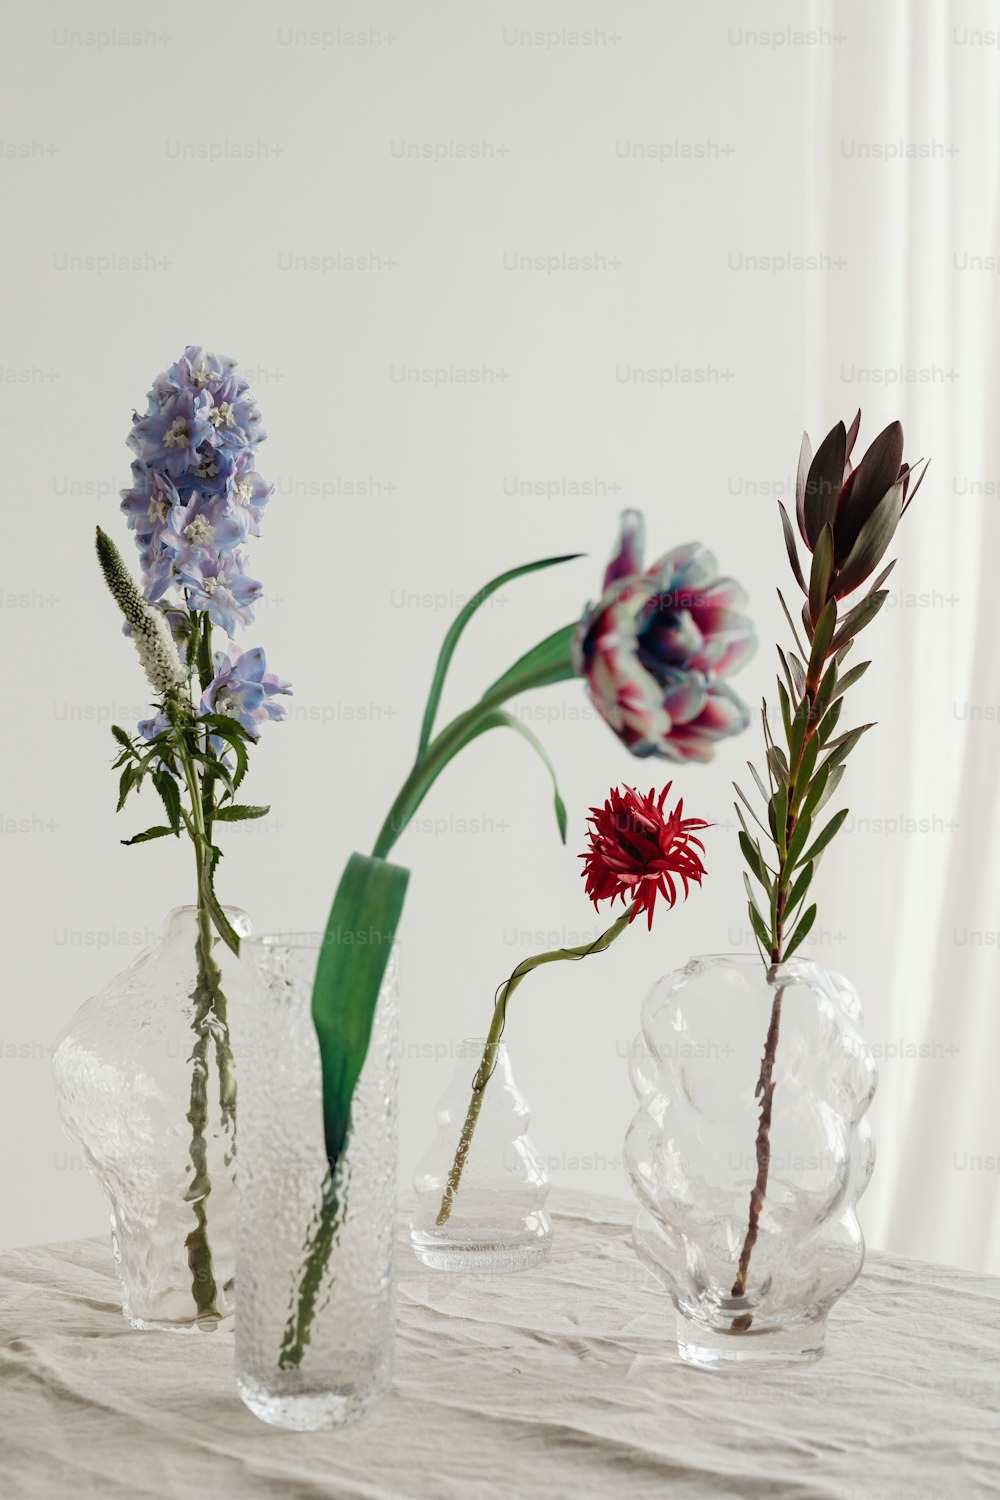 three glass vases with flowers in them on a table